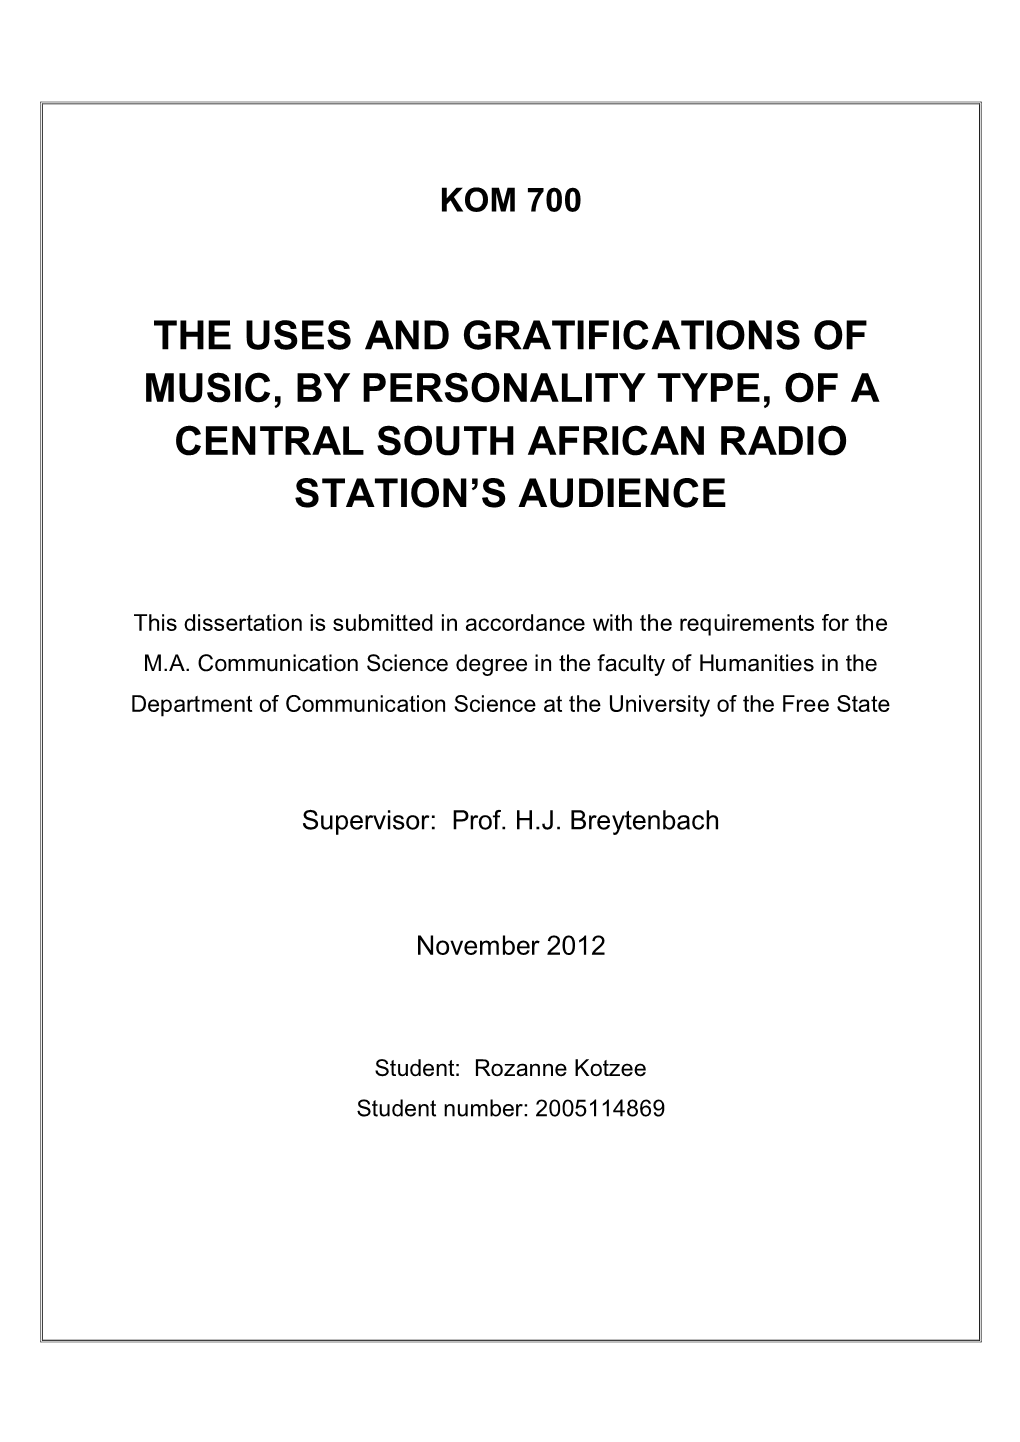 The Uses and Gratifications of Music, by Personality Type, of a Central South African Radio Station’S Audience